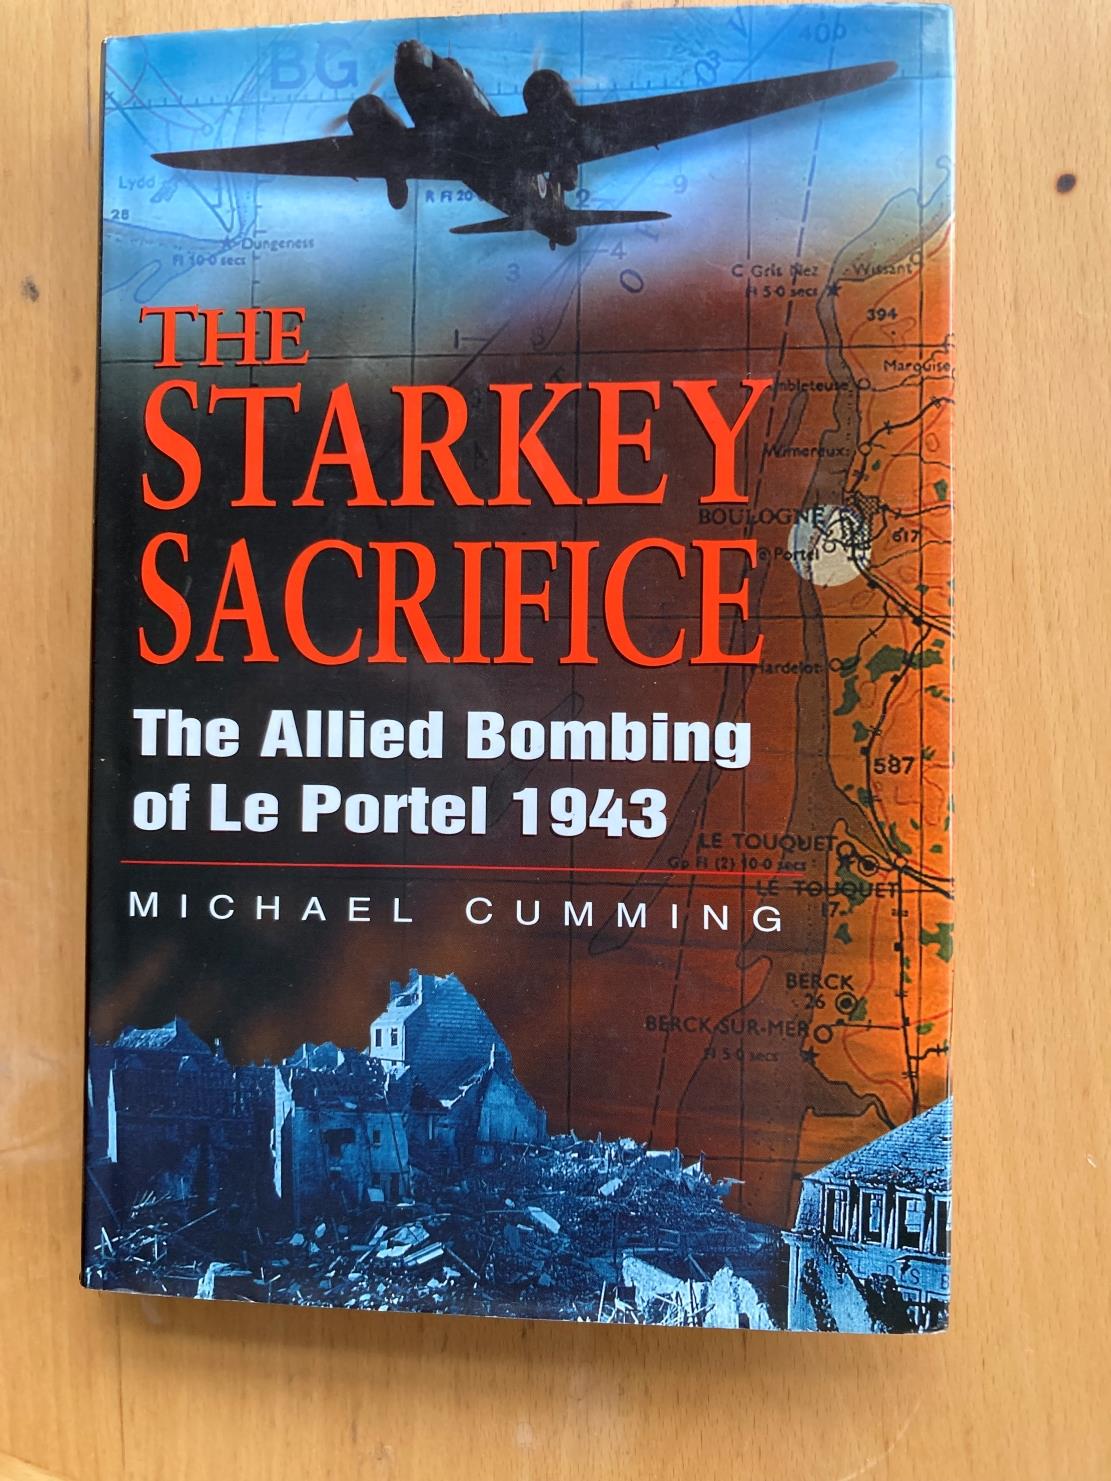 WW2 40 bomber Command veterans multiple signed books. The Starkey Sacrifice the Allied Bombing of Le